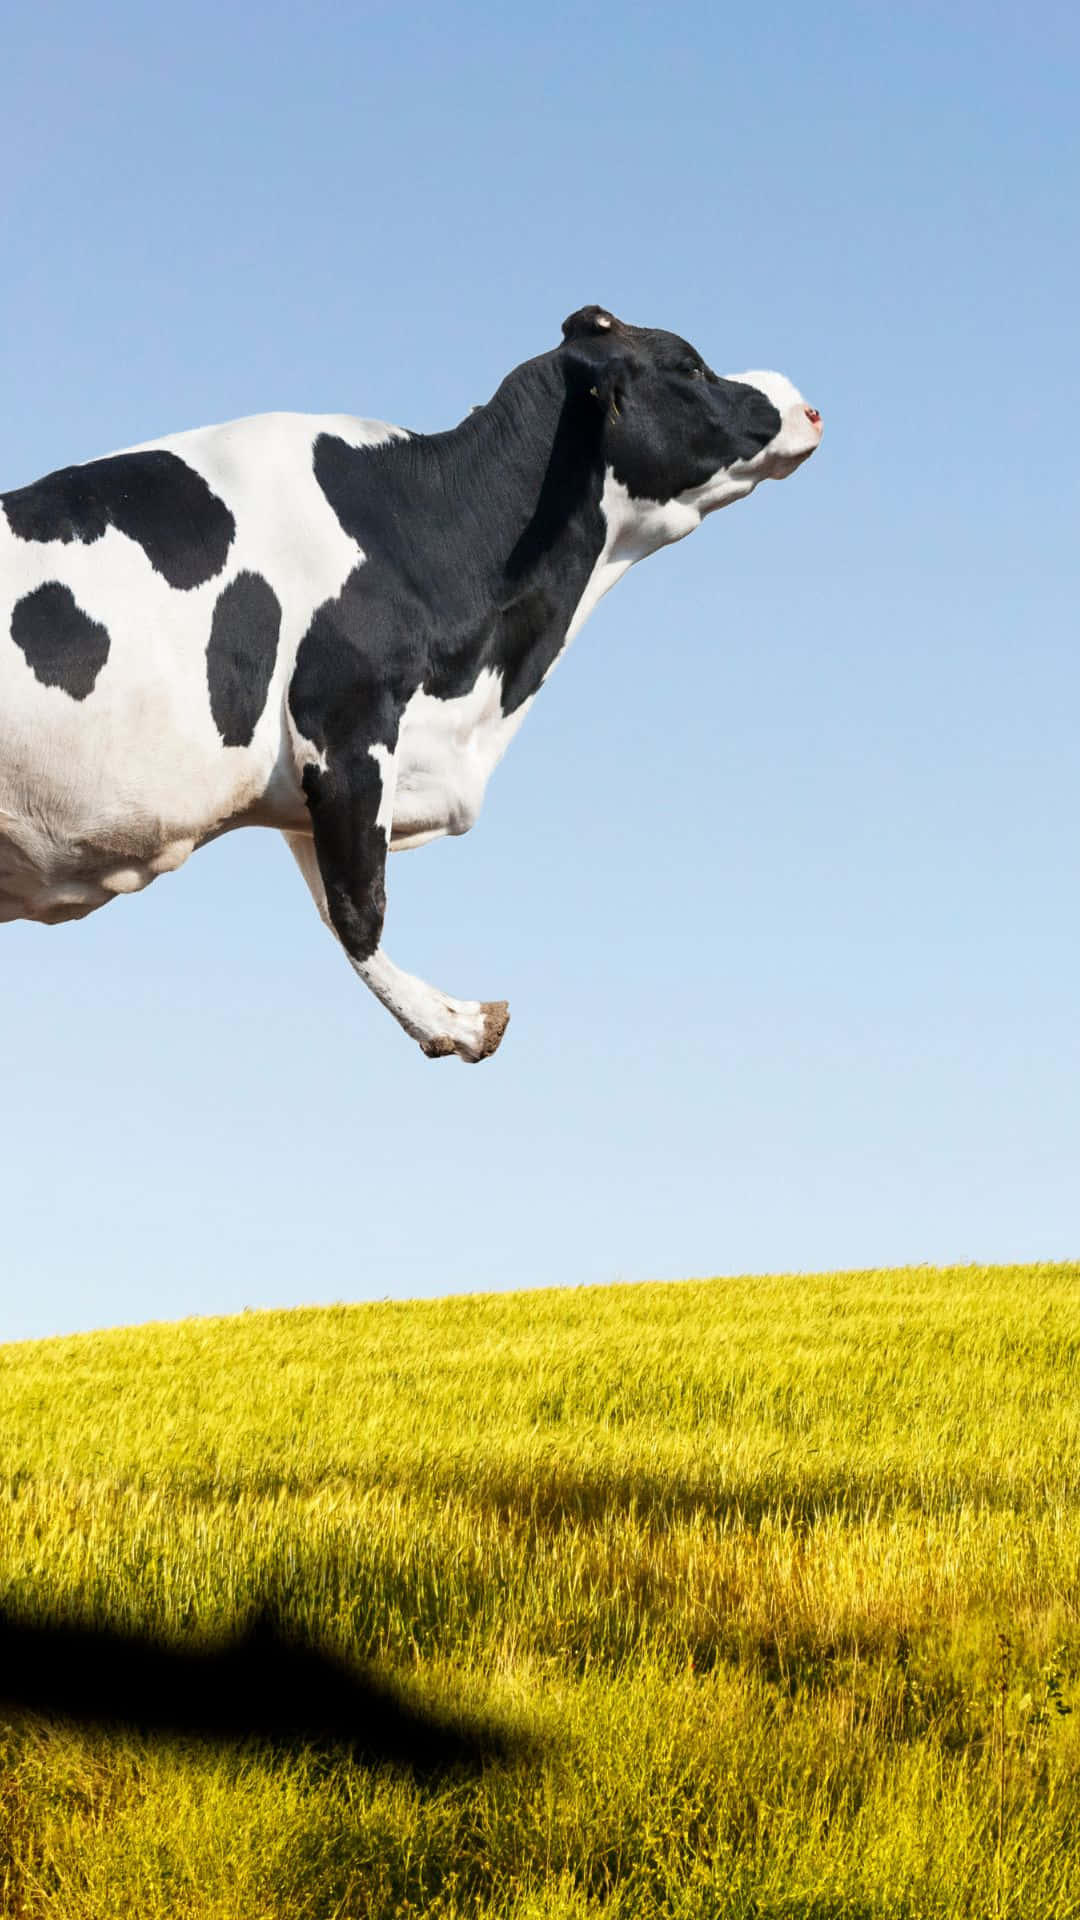 Download Our Newest Cow Themed Iphone Wallpapers!